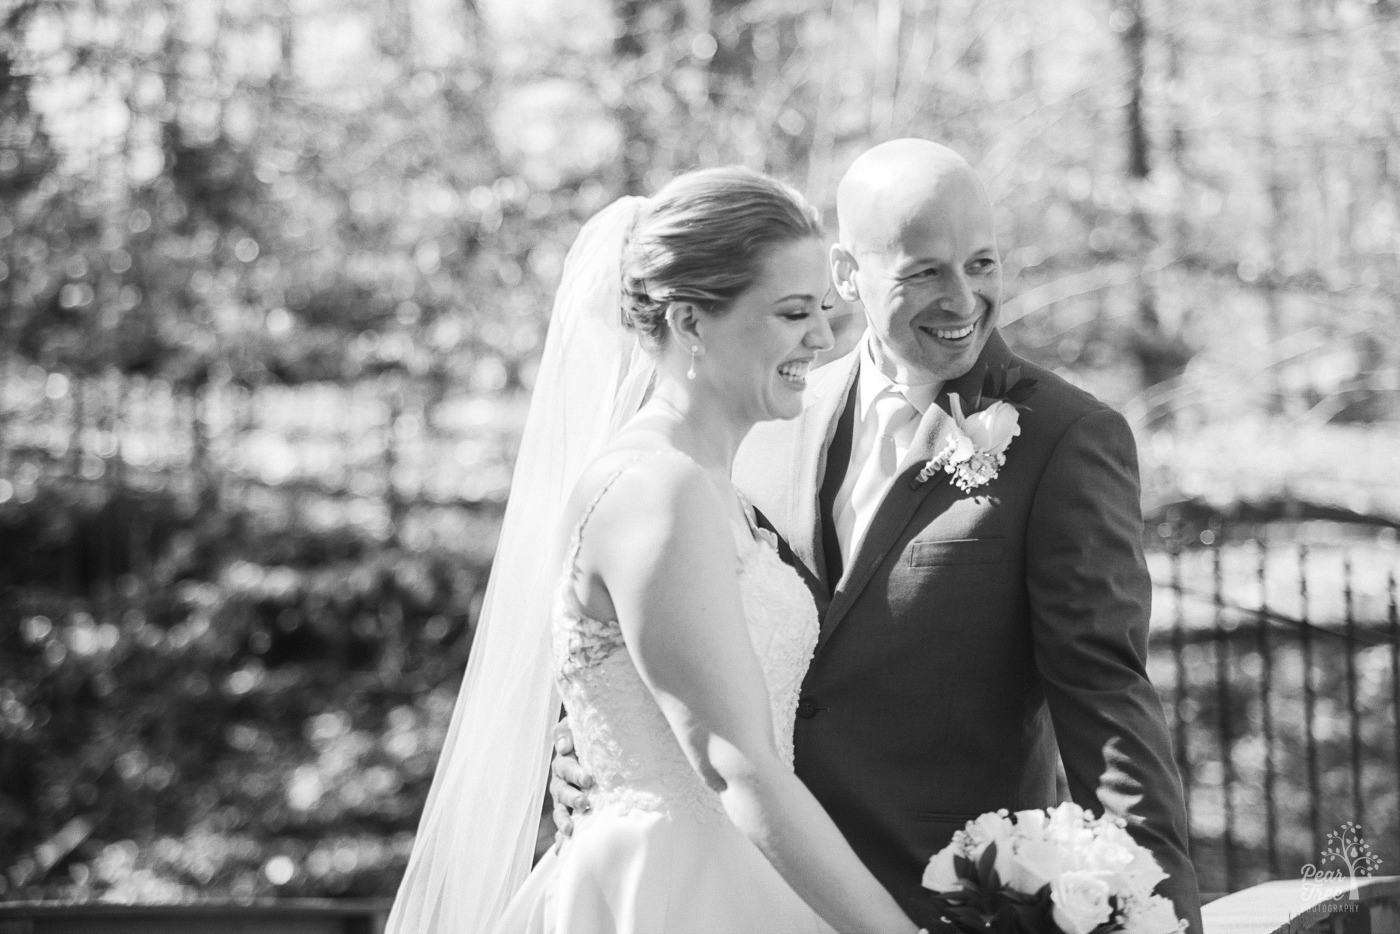 Black and white photo of bride and groom laughing while he has his hand around her back